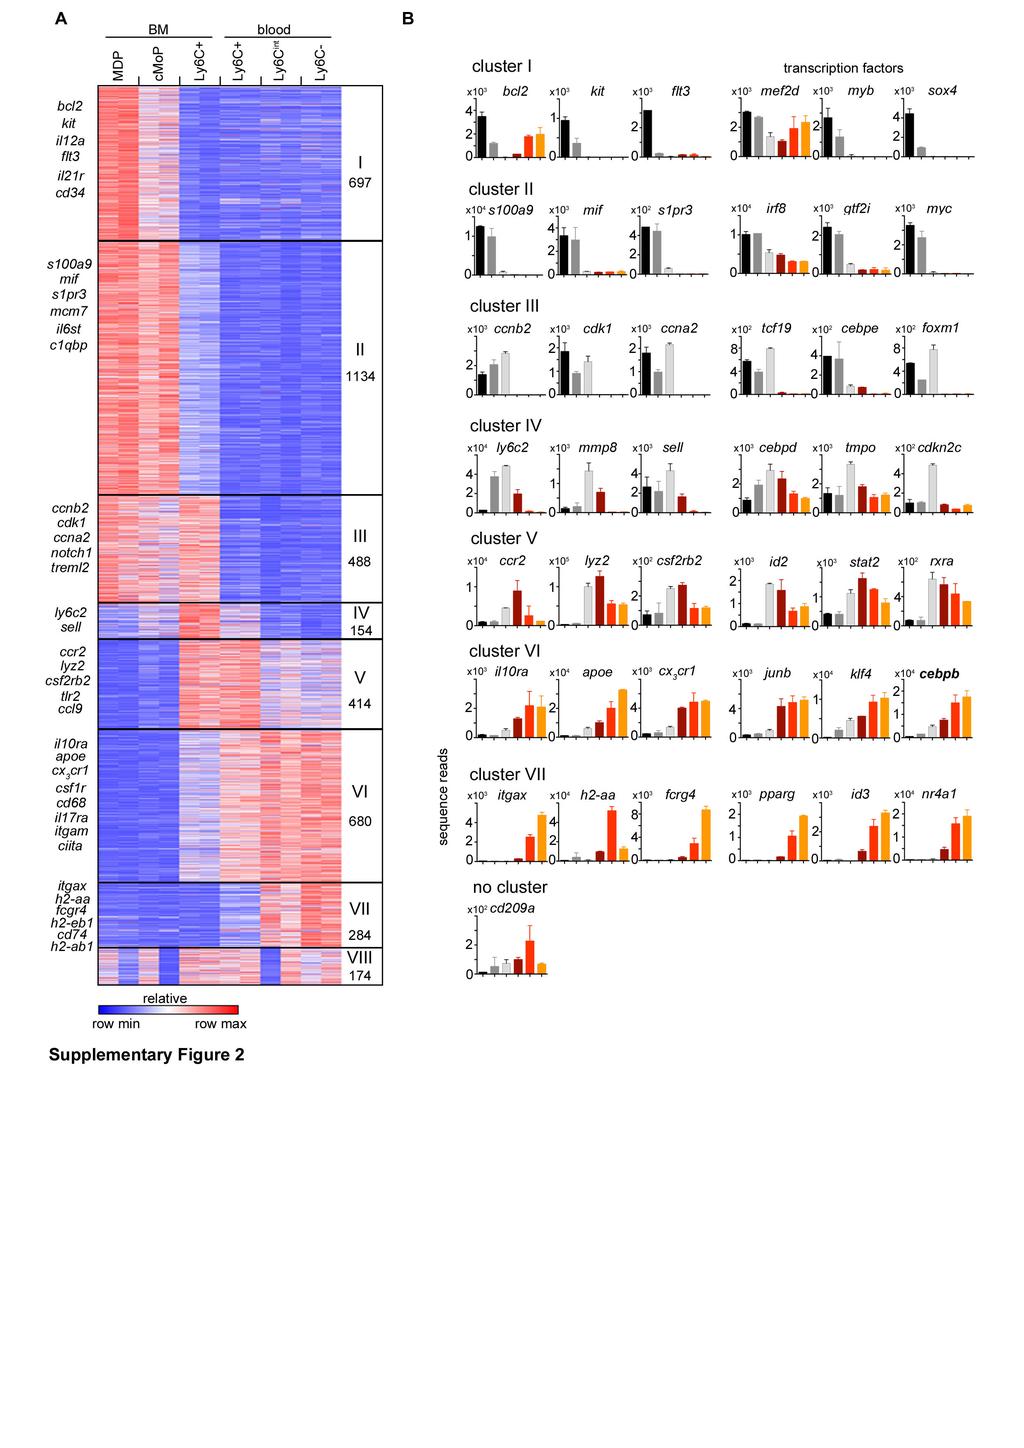 Supplementary Figure 2. Independent monocyte profiling by RNA-Seq Supporting main text figure 1.